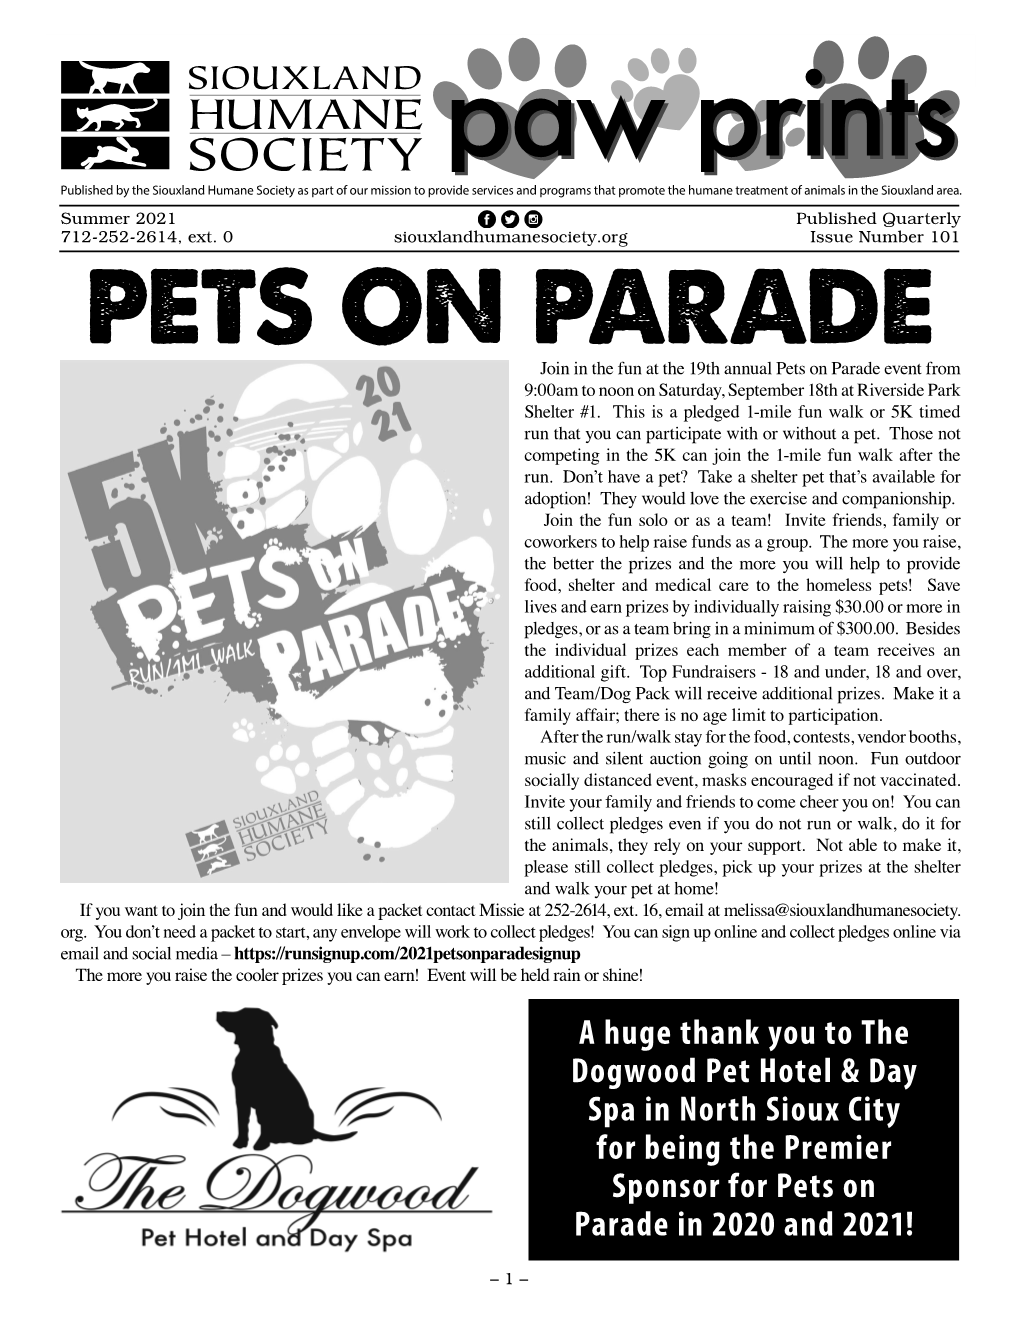 A Huge Thank You to the Dogwood Pet Hotel & Day Spa in North Sioux City for Being the Premier Sponsor for Pets on Parade In